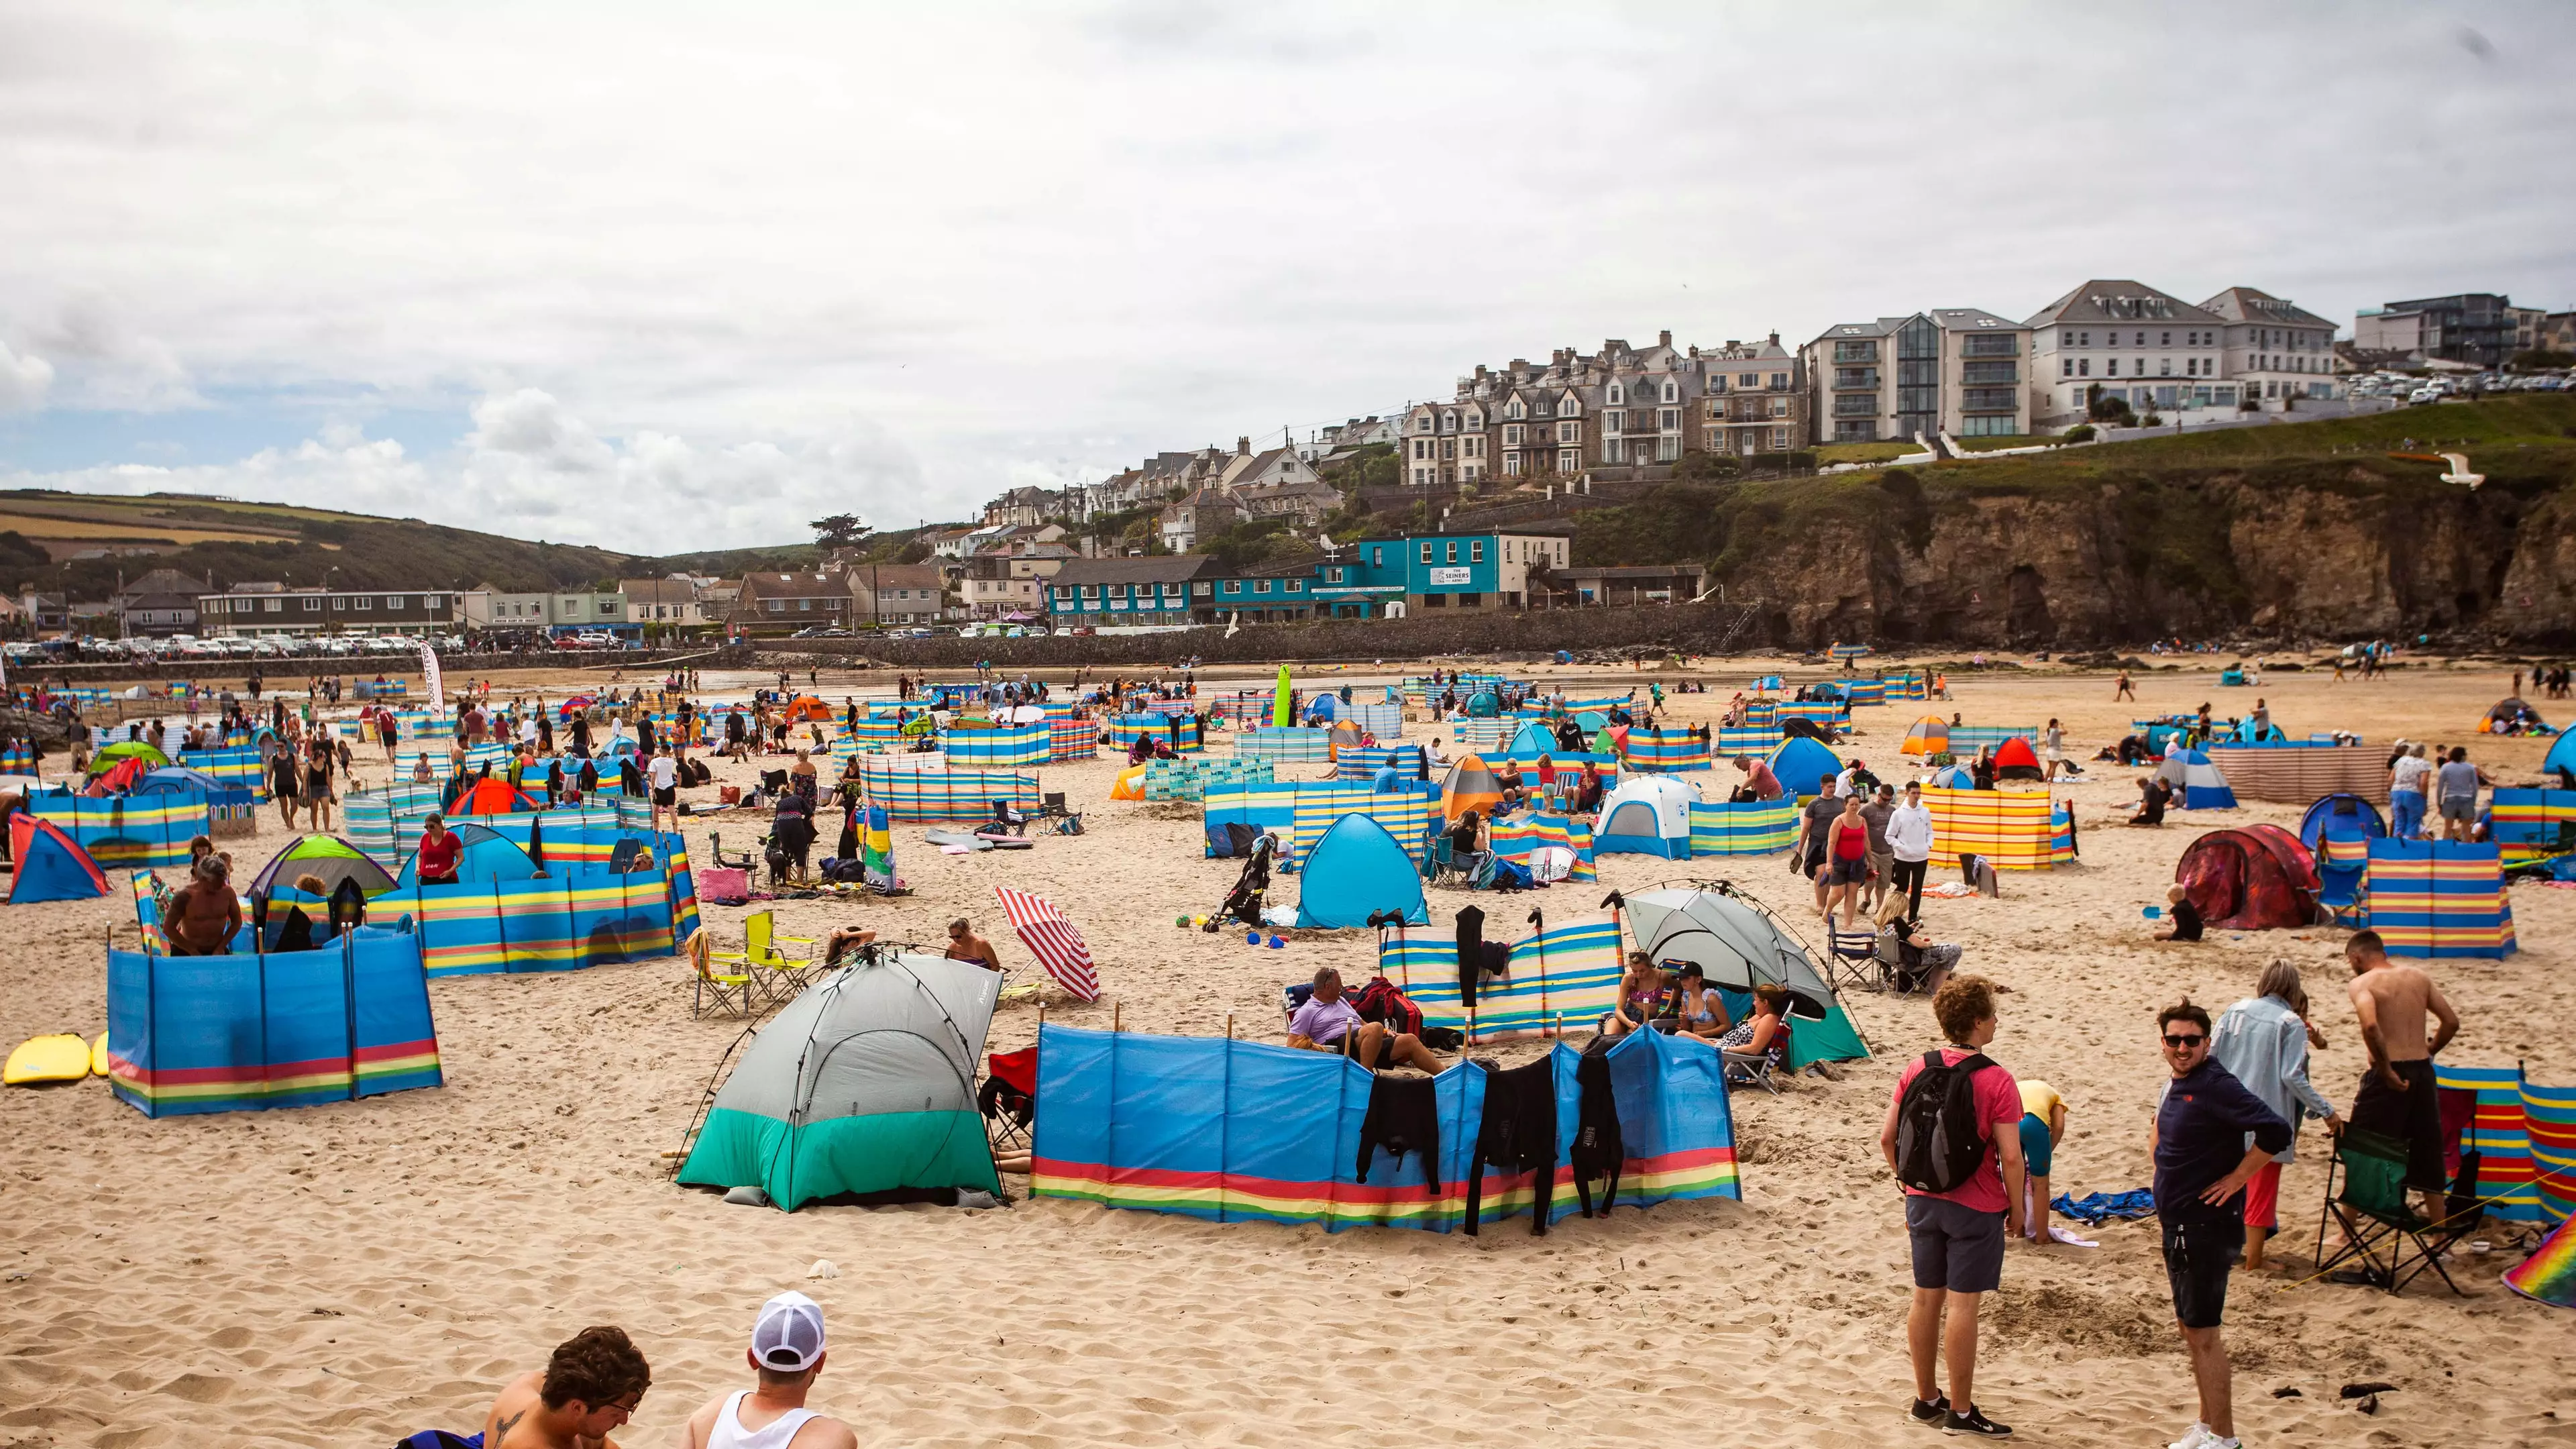 Cornwall Branded 'Benidorm On Steroids' As Tourists Swarm On Beaches